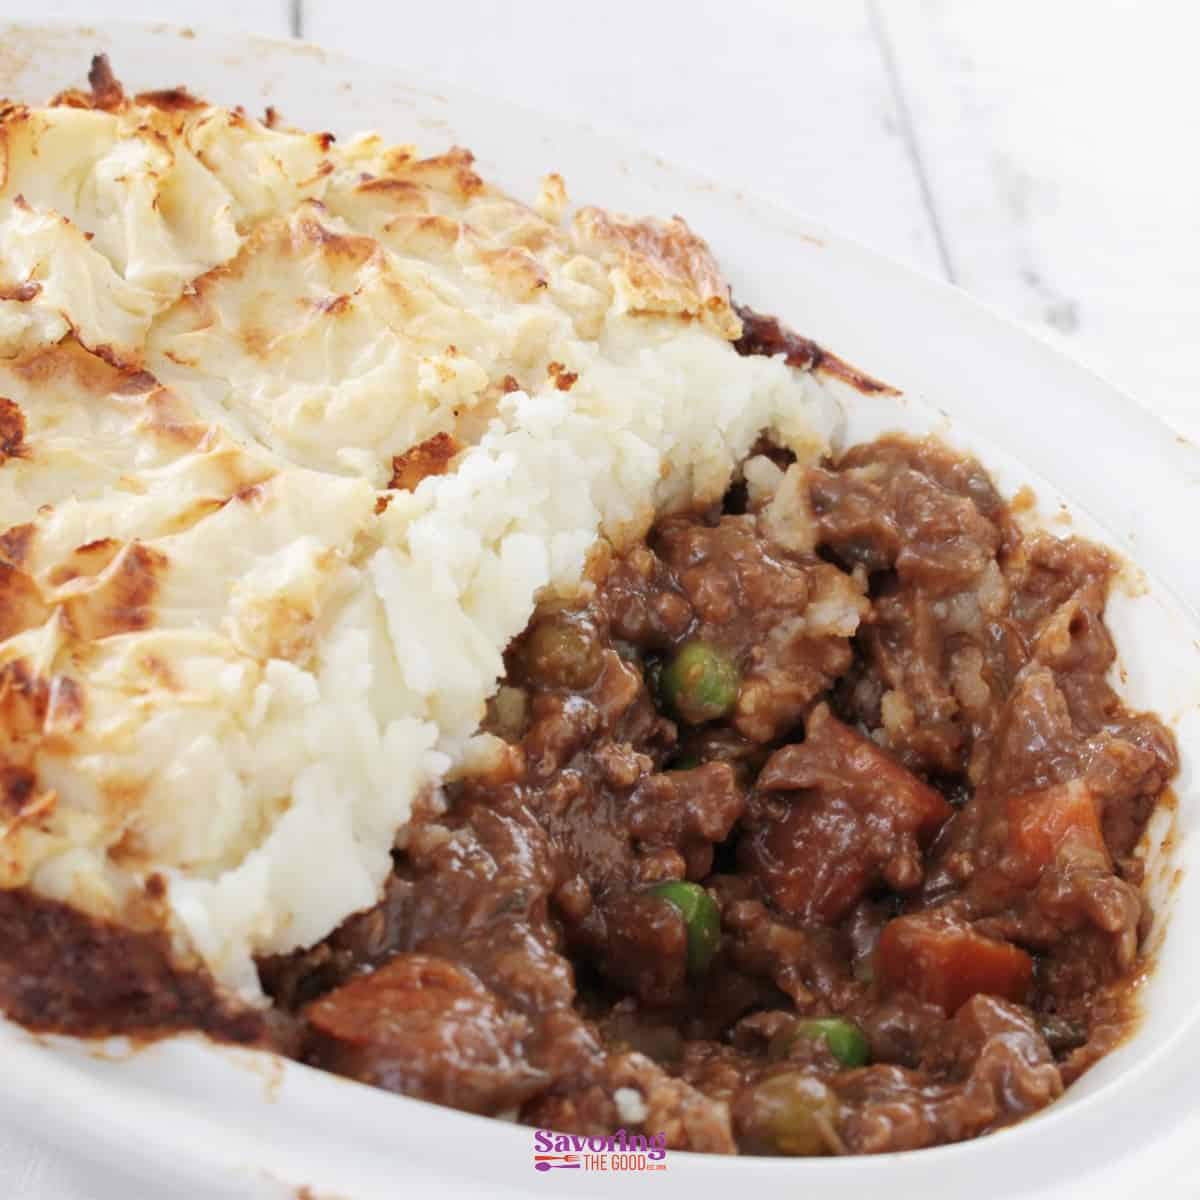 A casserole dish with meat and mashed potatoes.